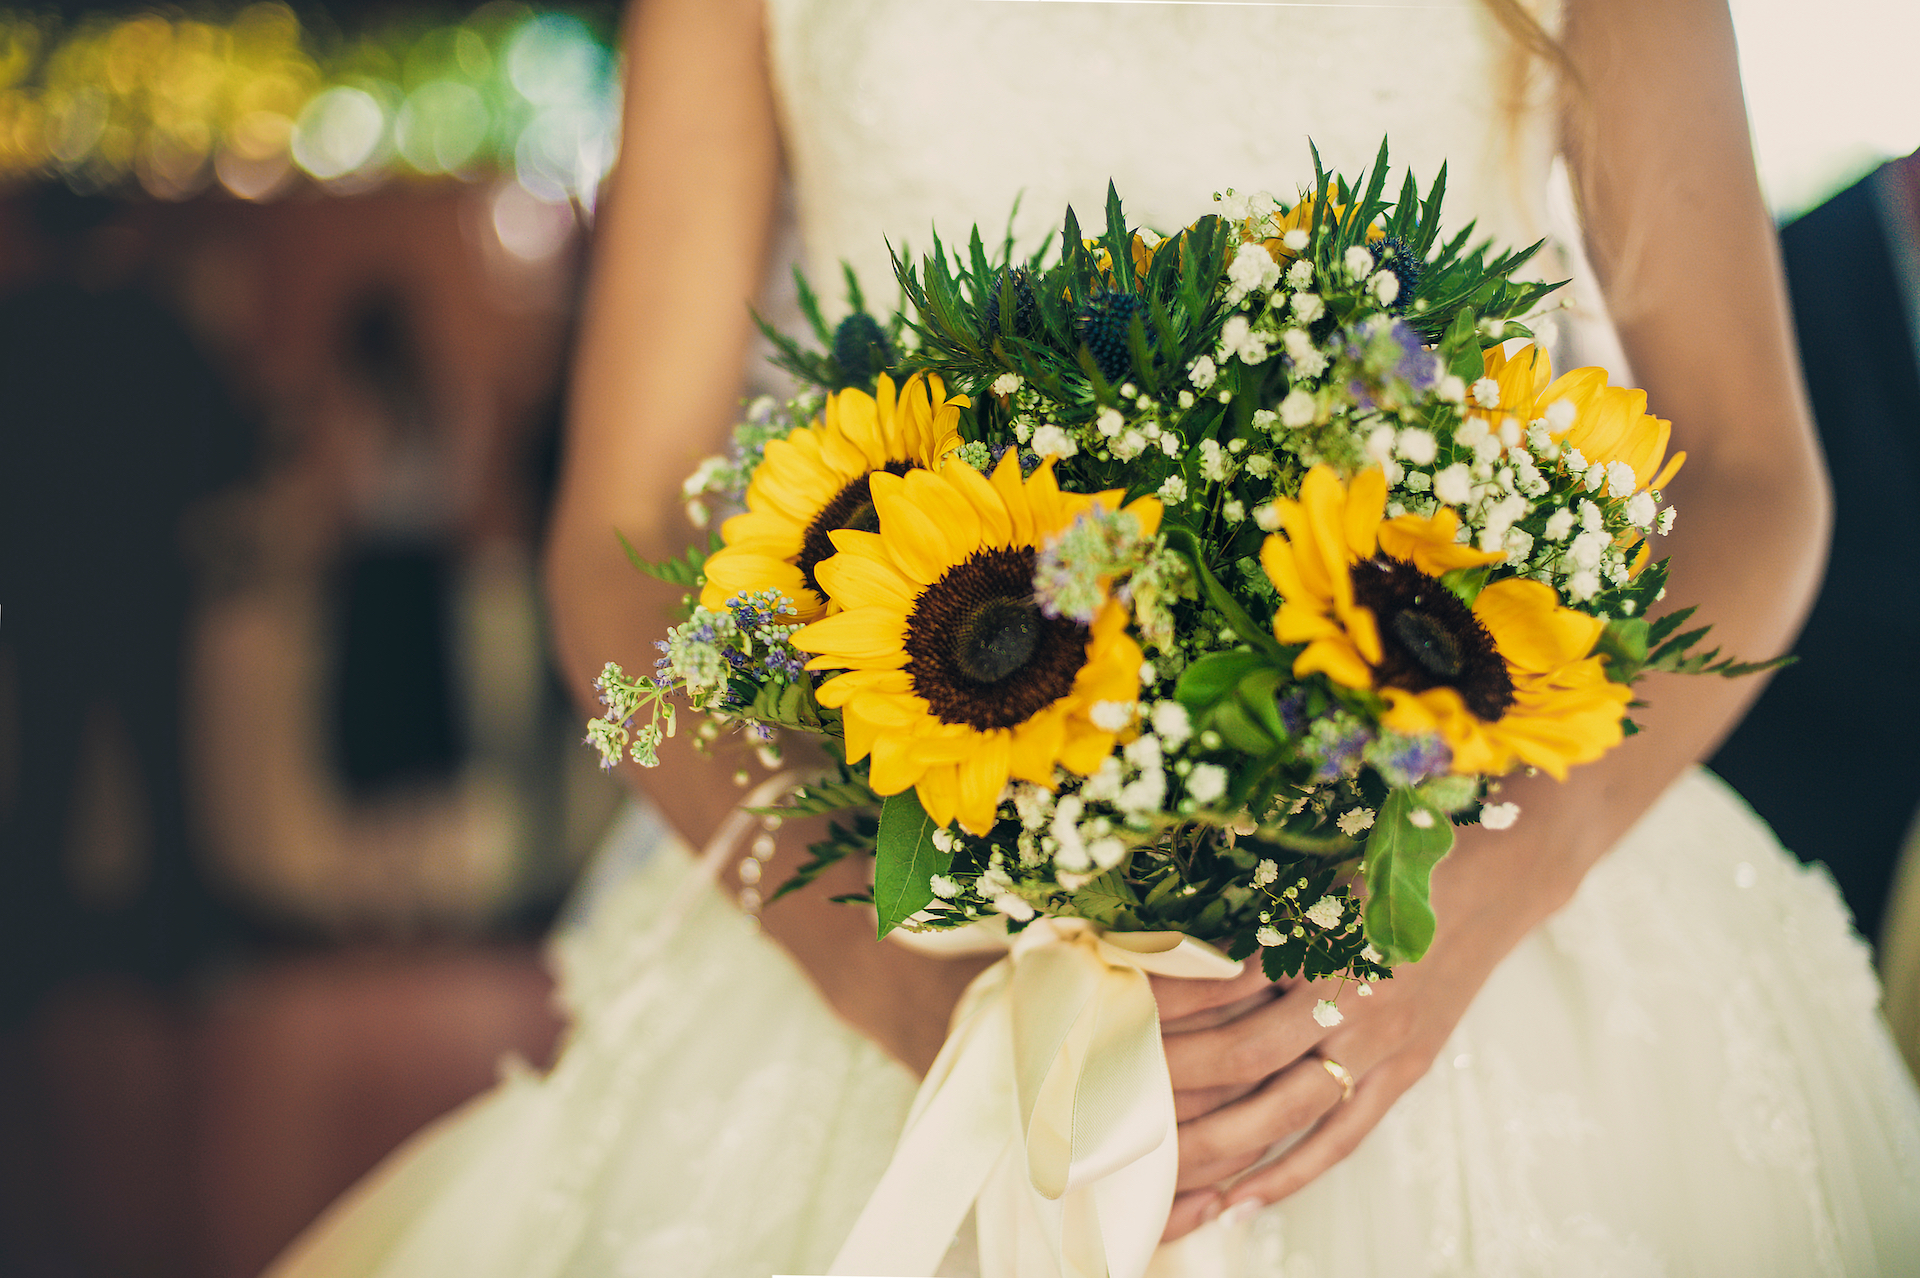 bride holding a cheerful wedding bouquet with sunflowers and greenery